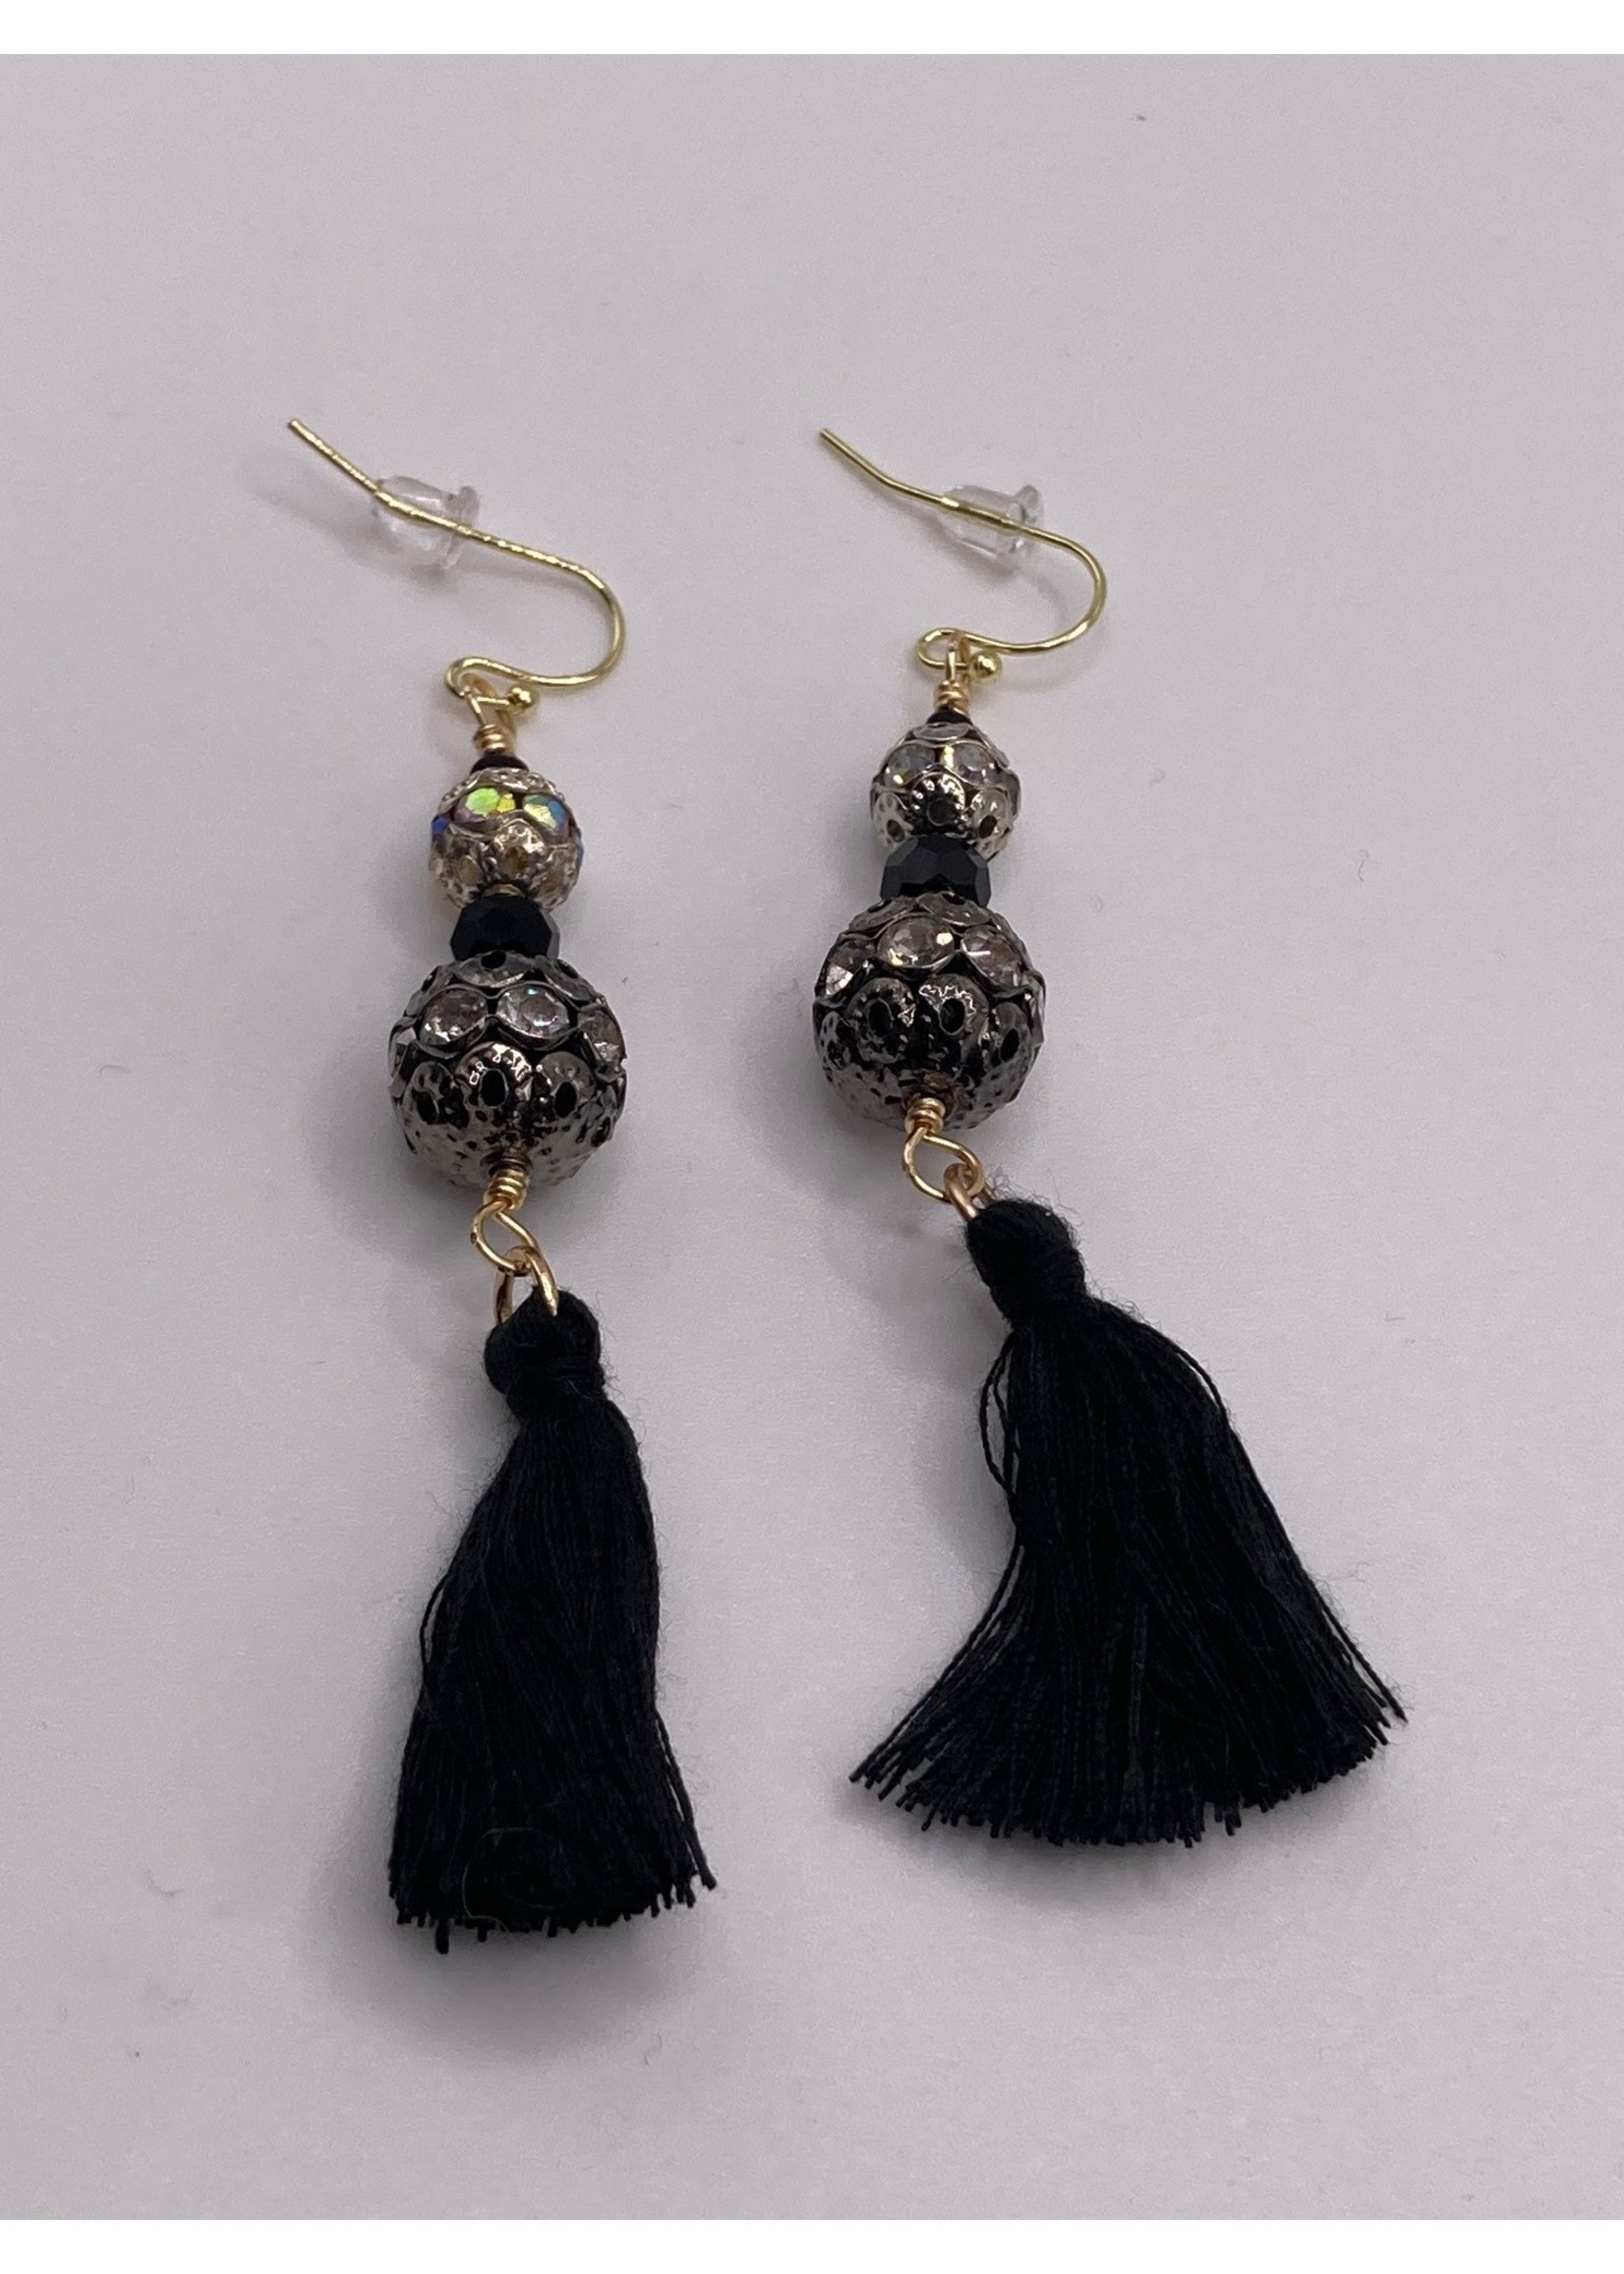 Our Twisted Dahlia Antiqued Metal Beads in Black and Silver with Rhinestones and Black Tassel Earrings